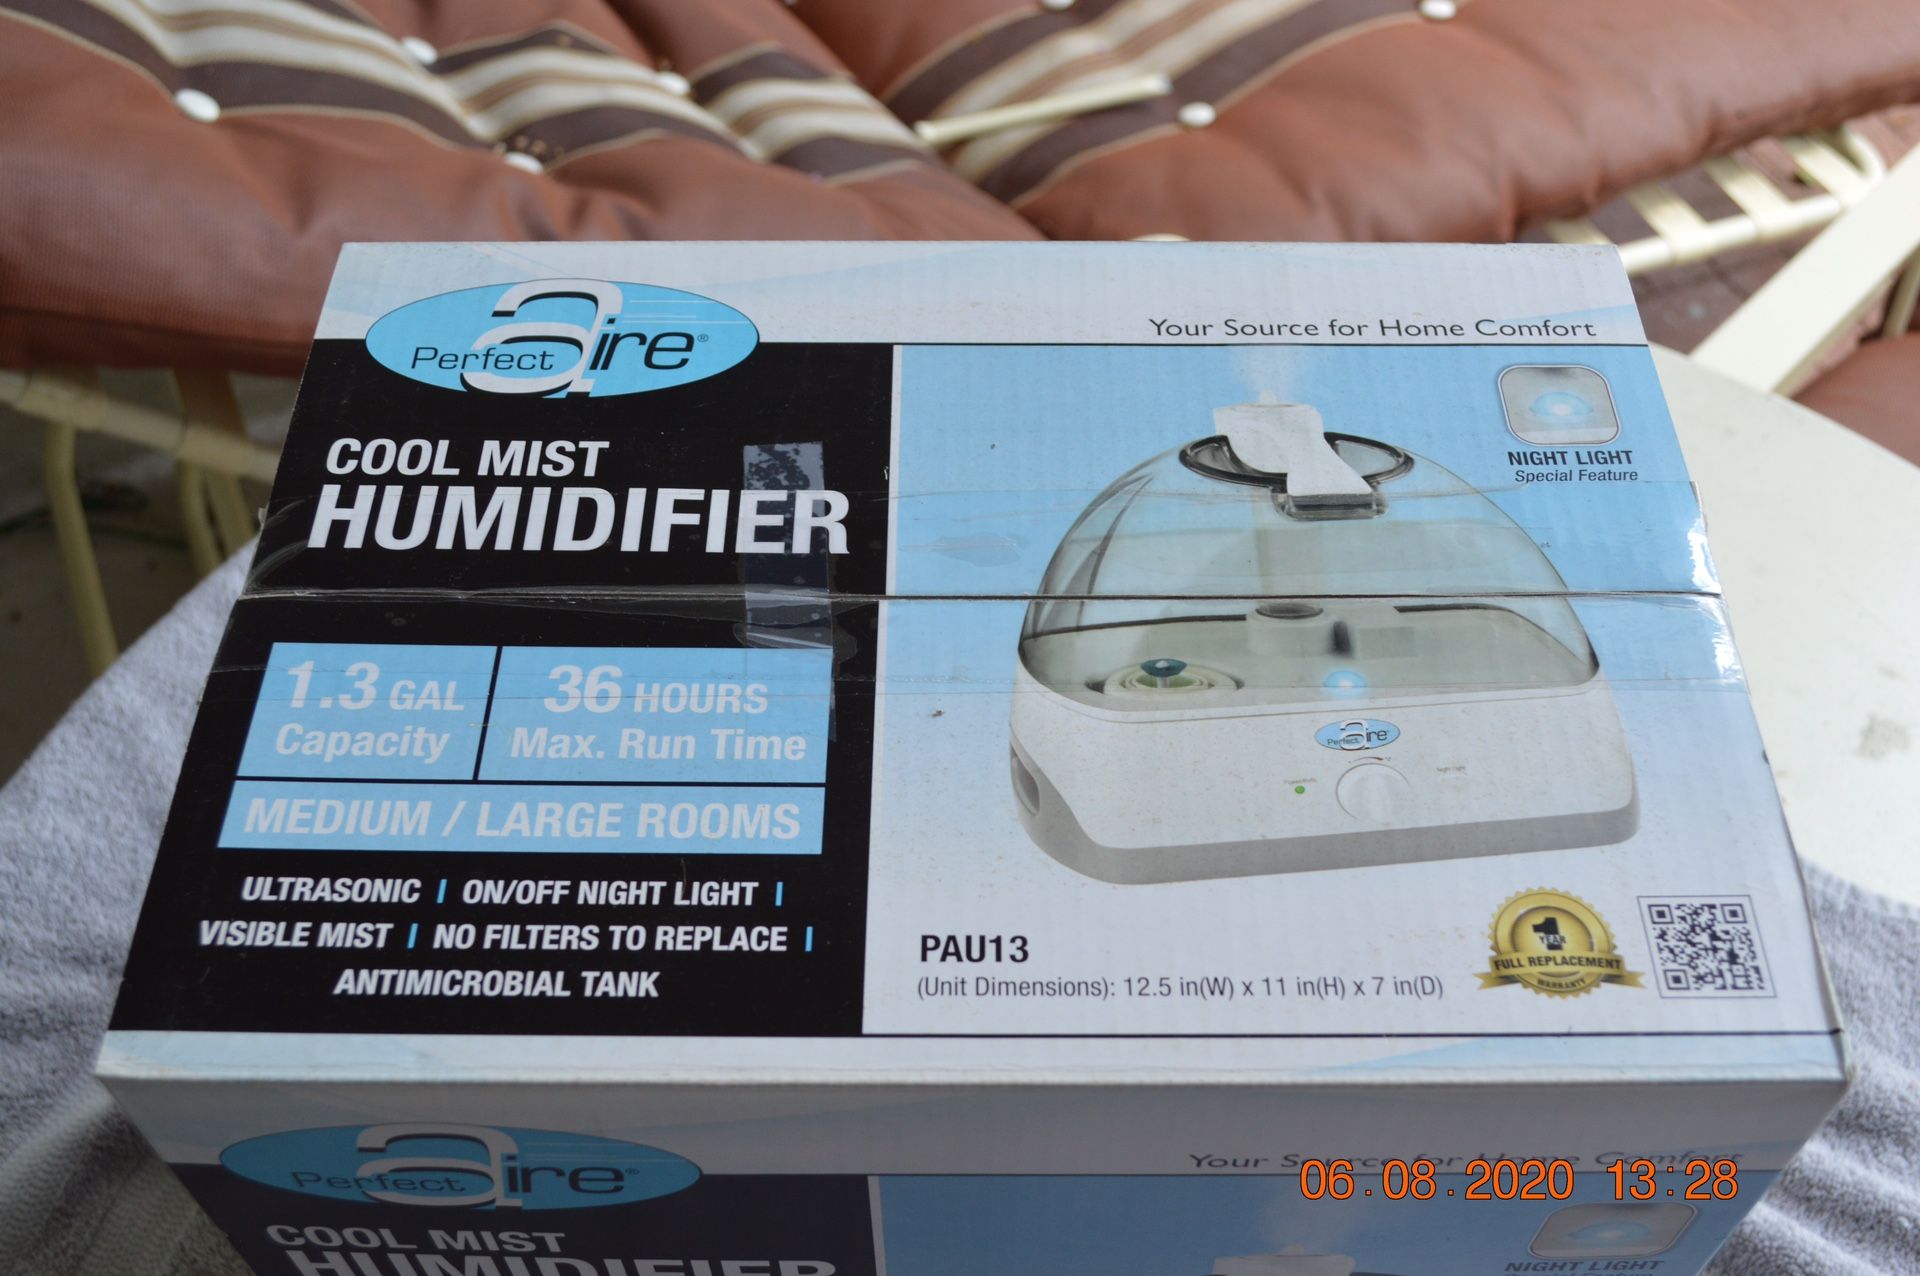 Humidifier perfect aire cool mist